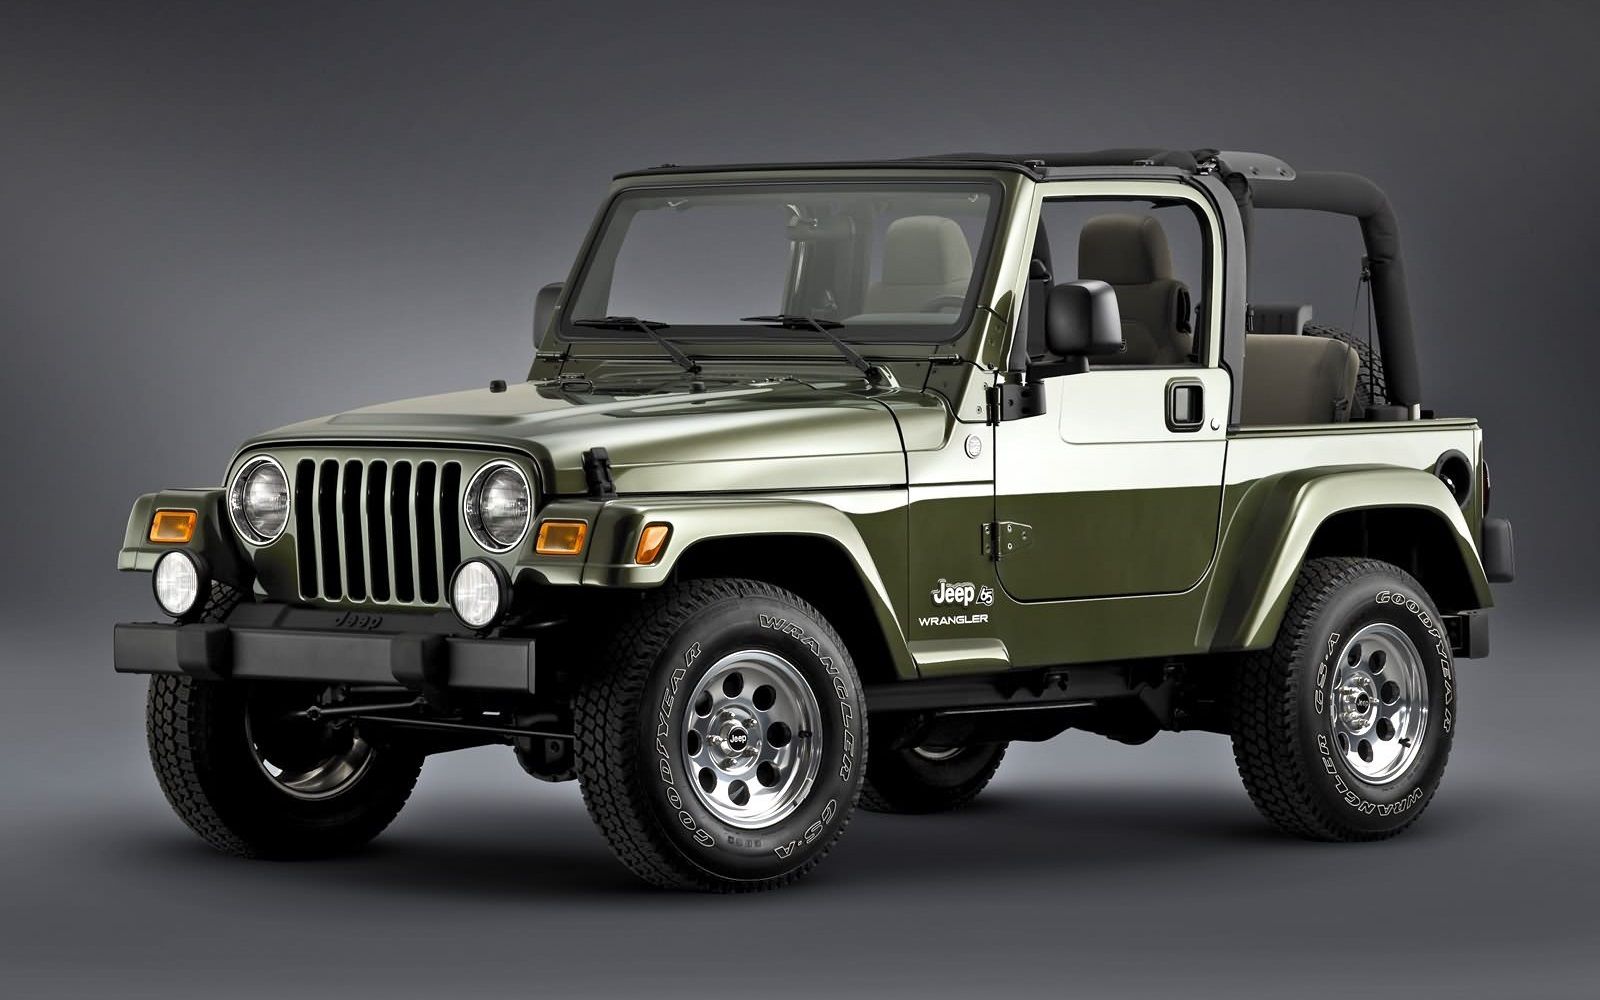 2008 Jeep Wrangler Unlimited Sahara 0-60 Times, Top Speed, Specs, Quarter  Mile, and Wallpapers - MyCarSpecs United States / USA